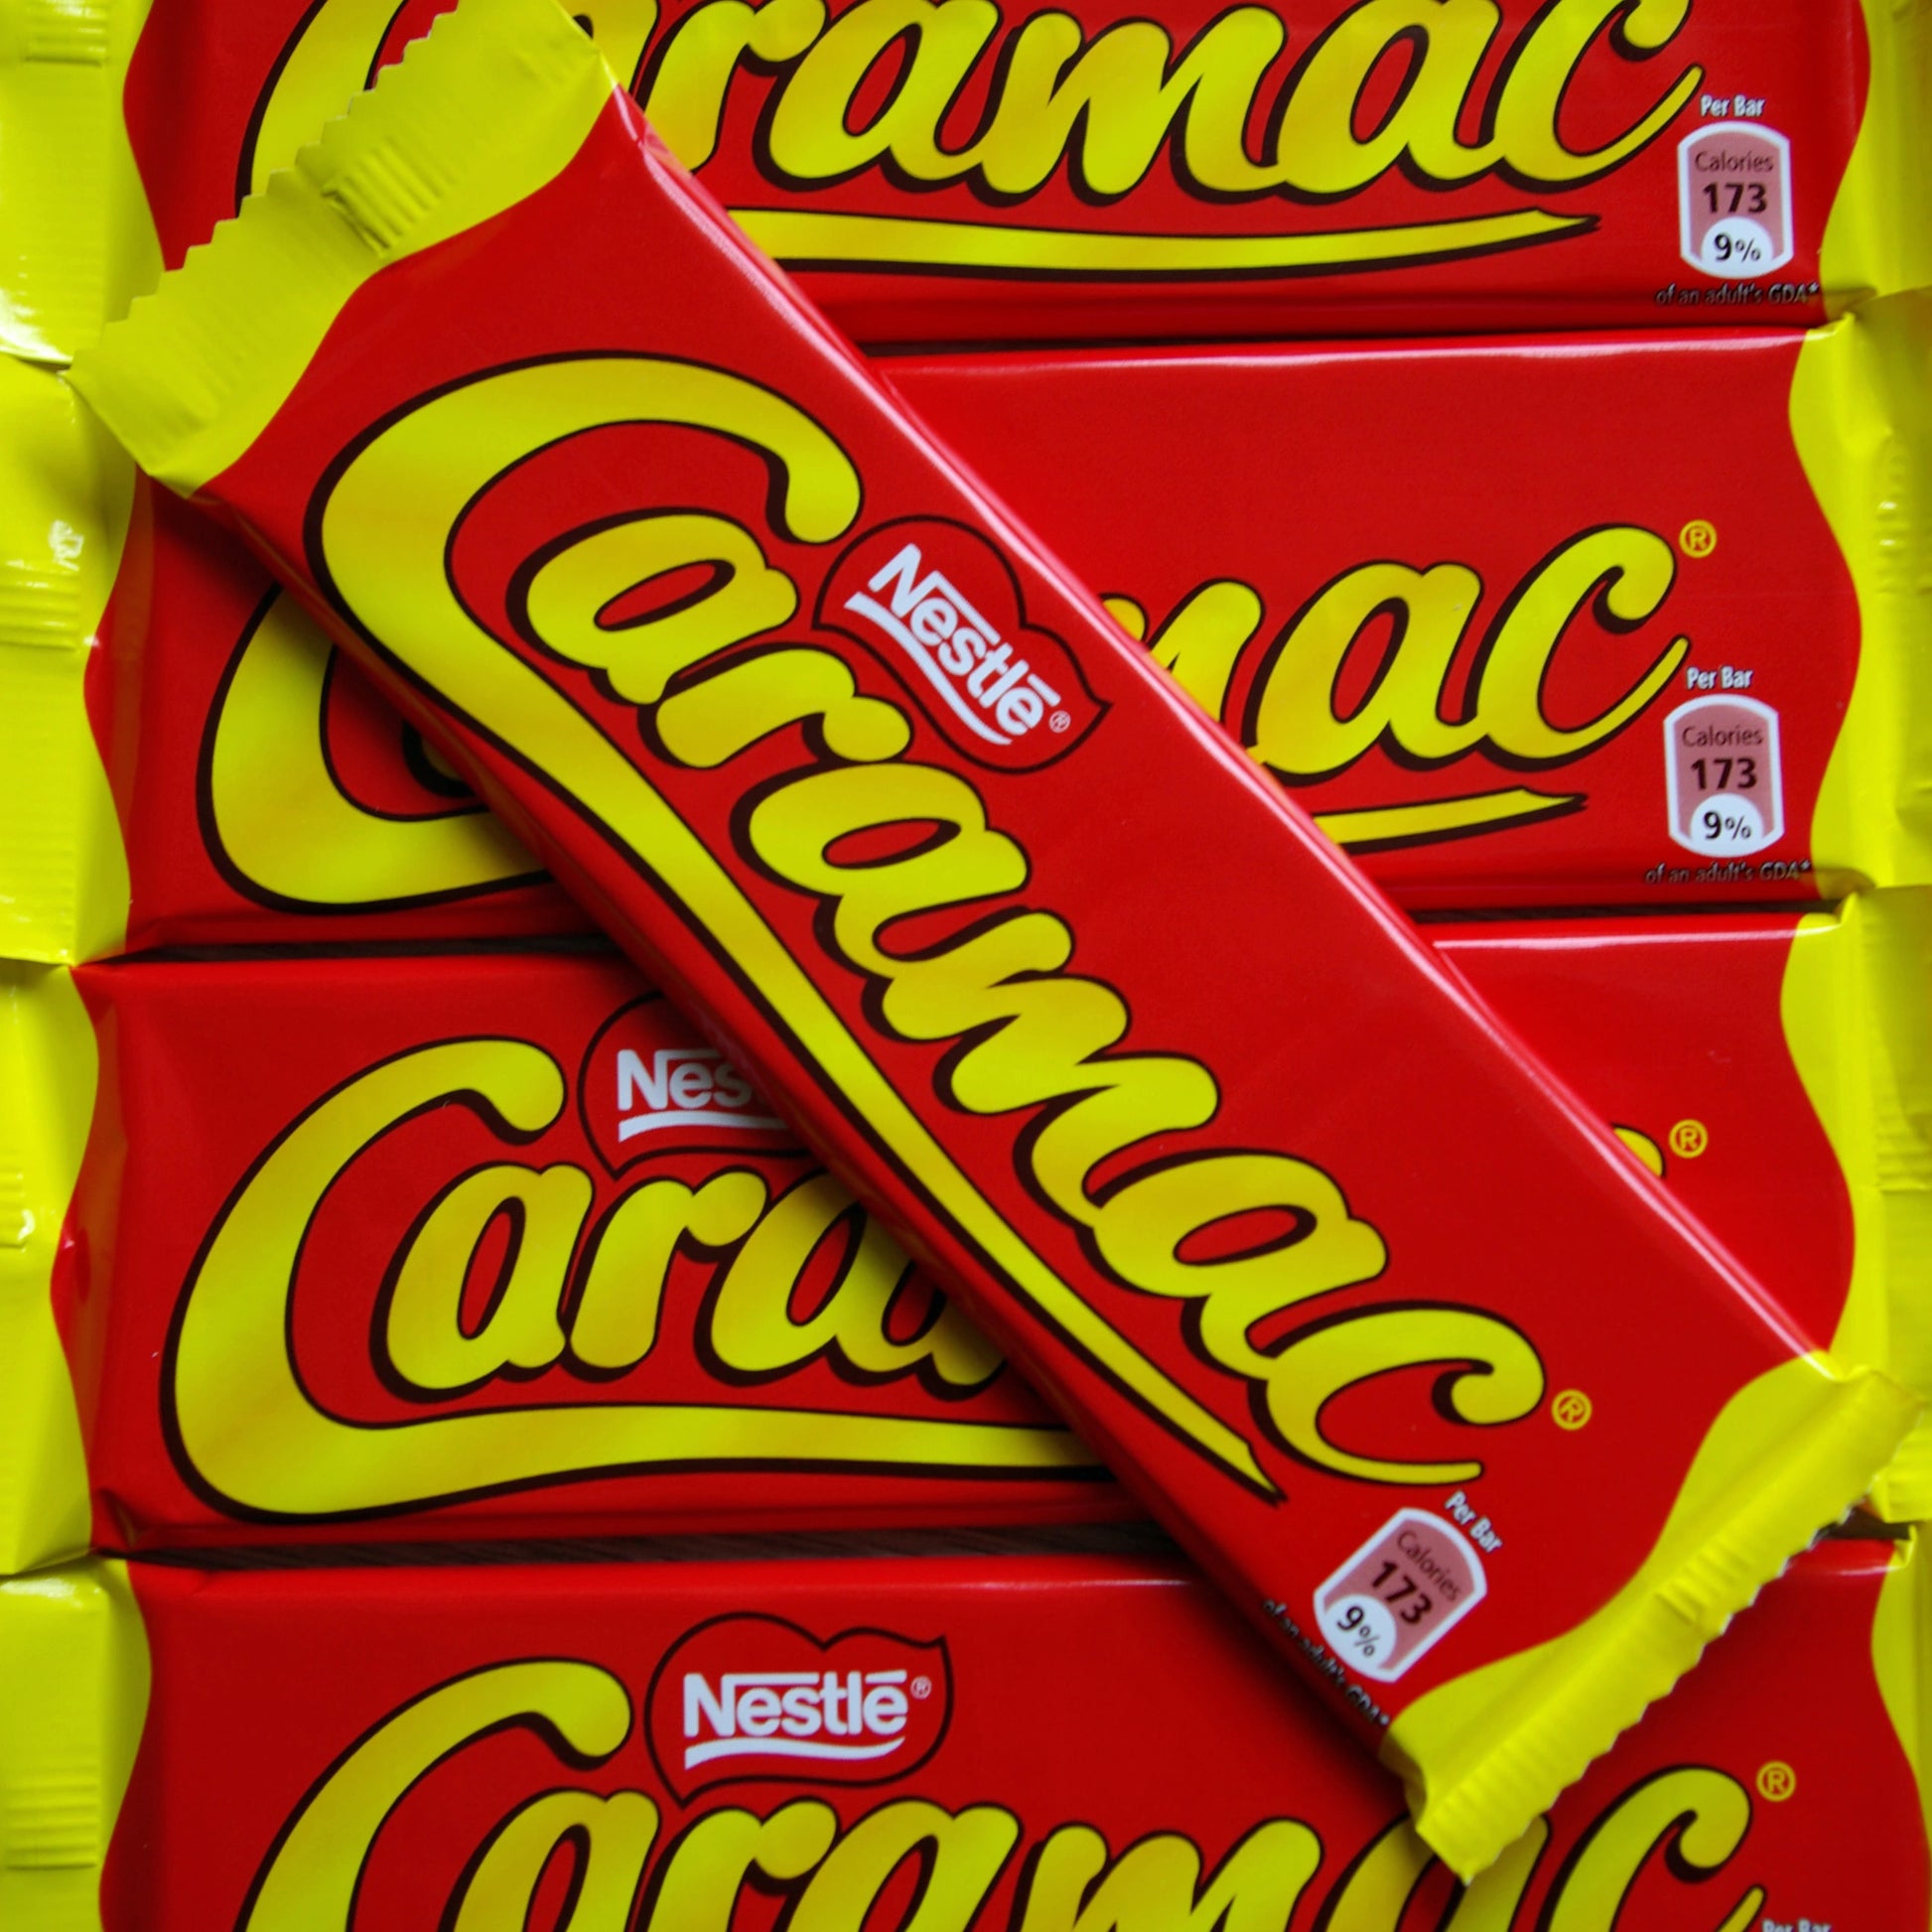 Caramac - Retro Sweets at The Sweetie Jar